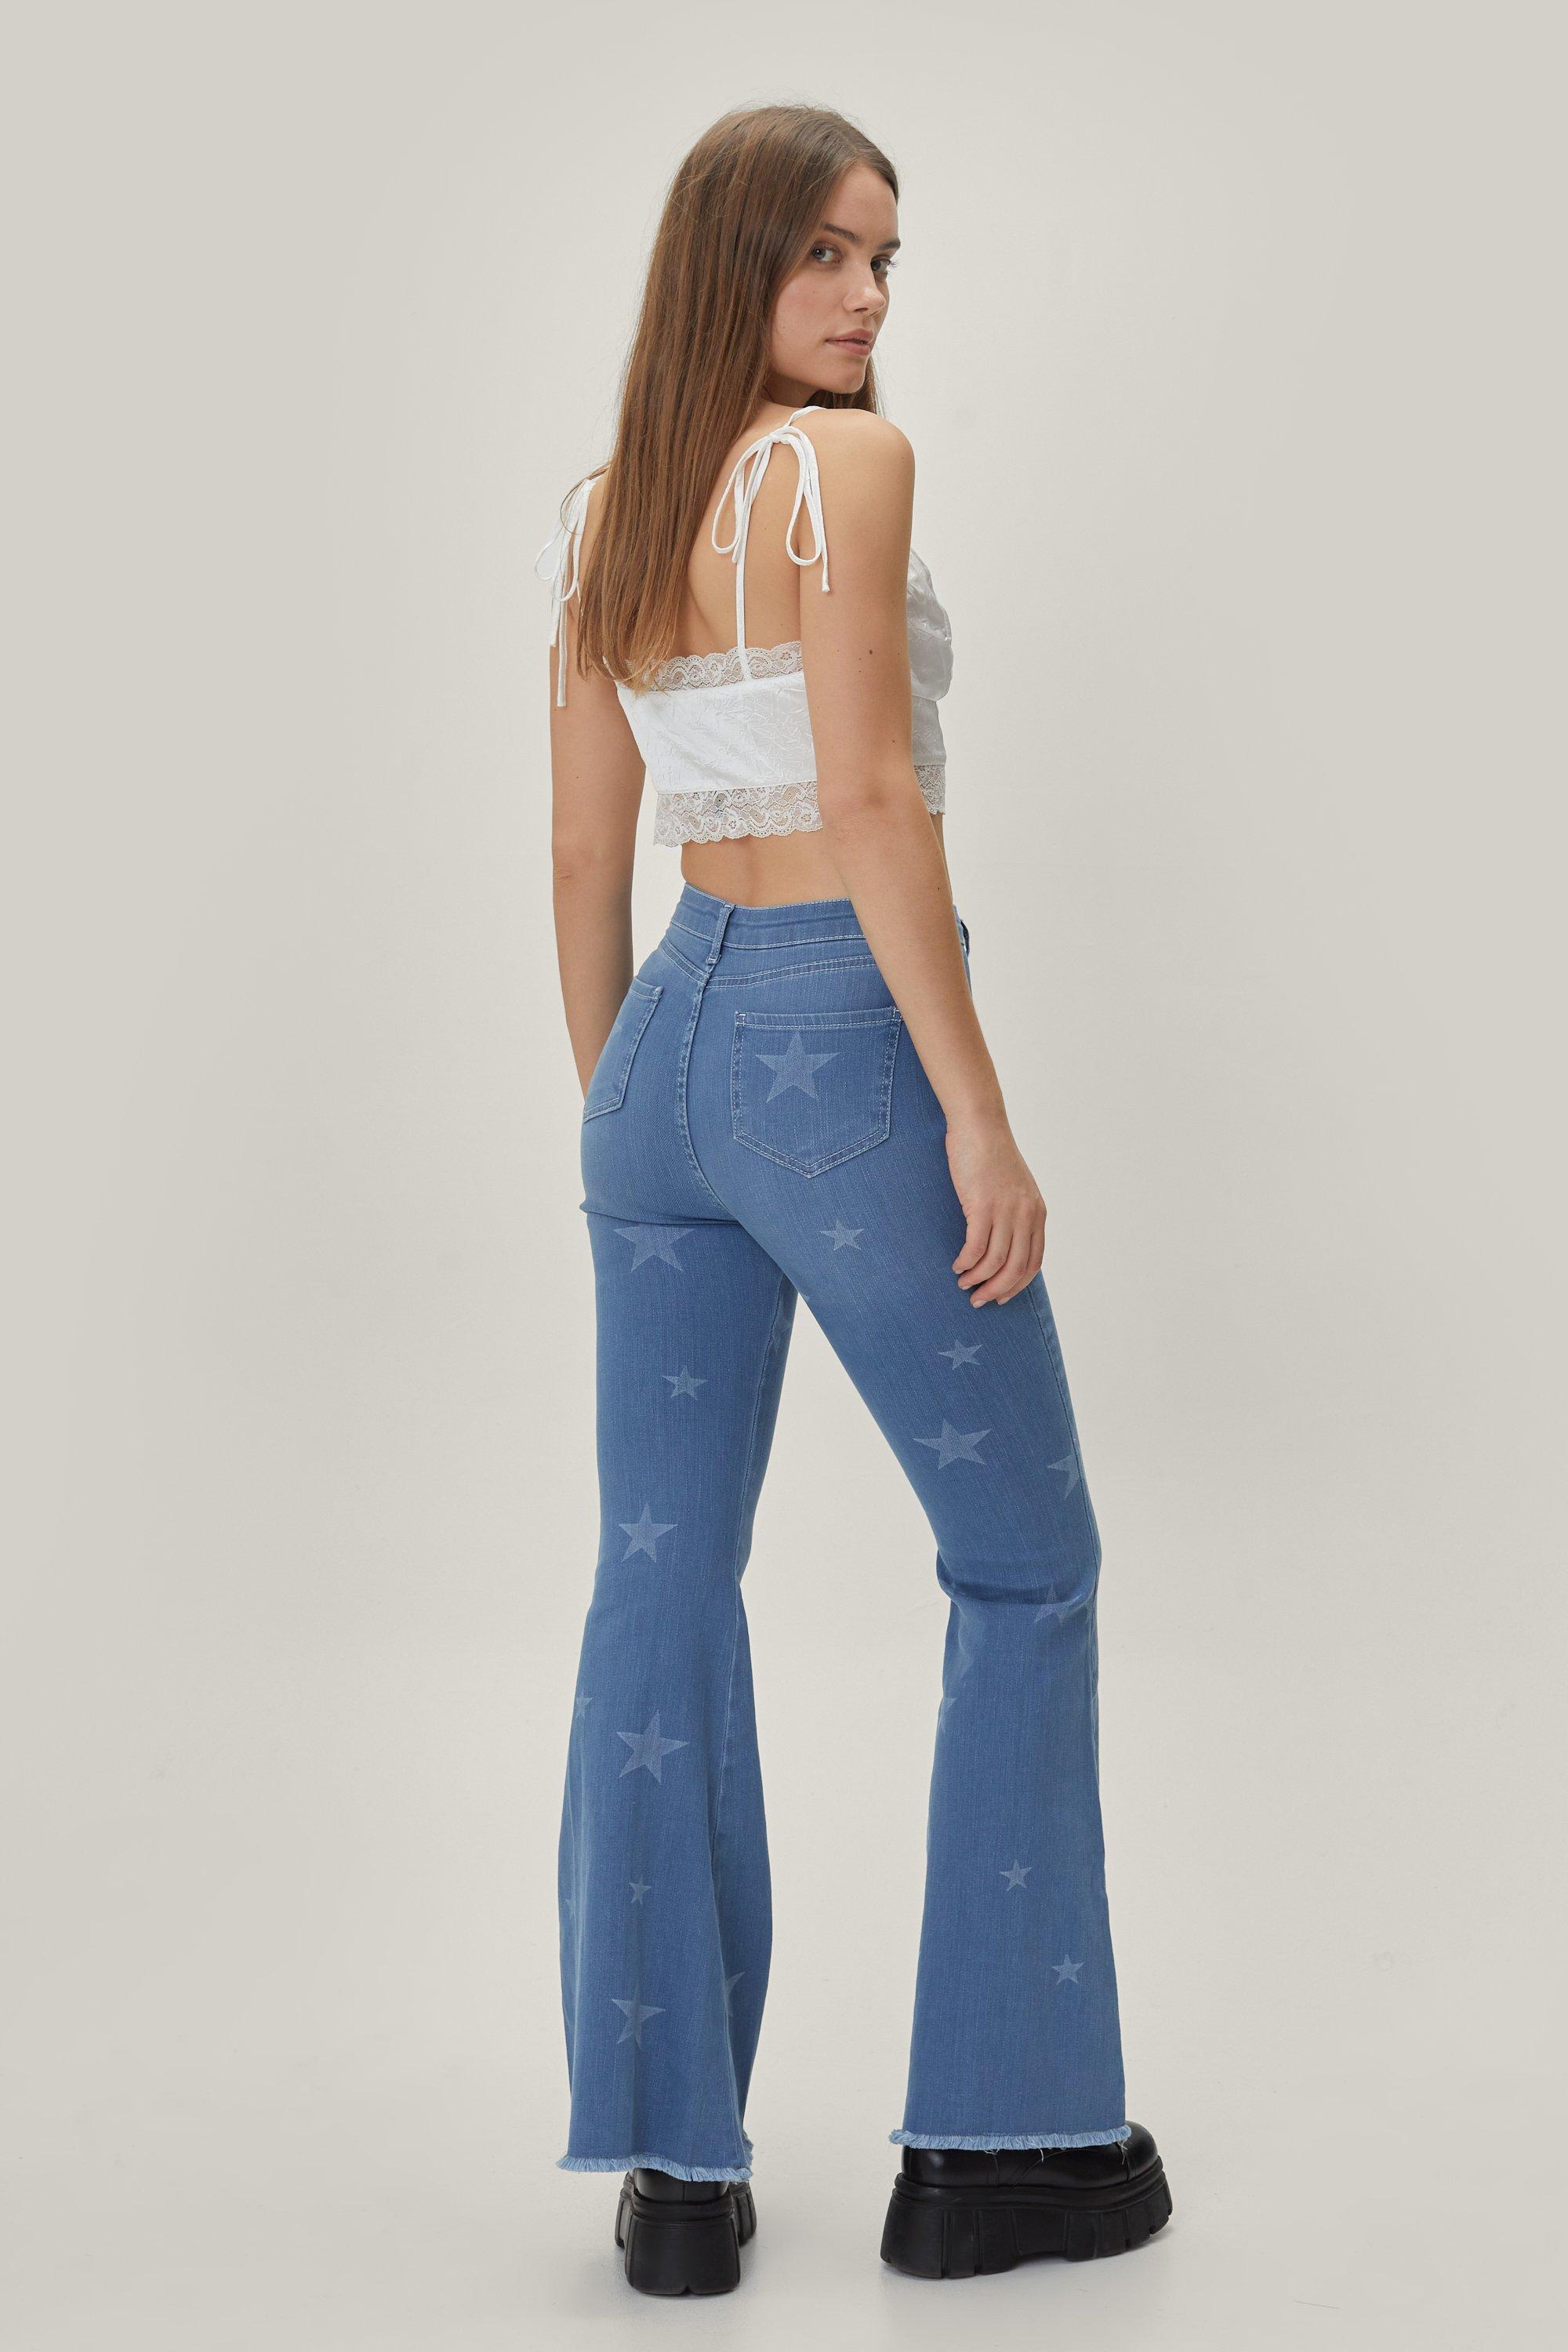 jeans with stars